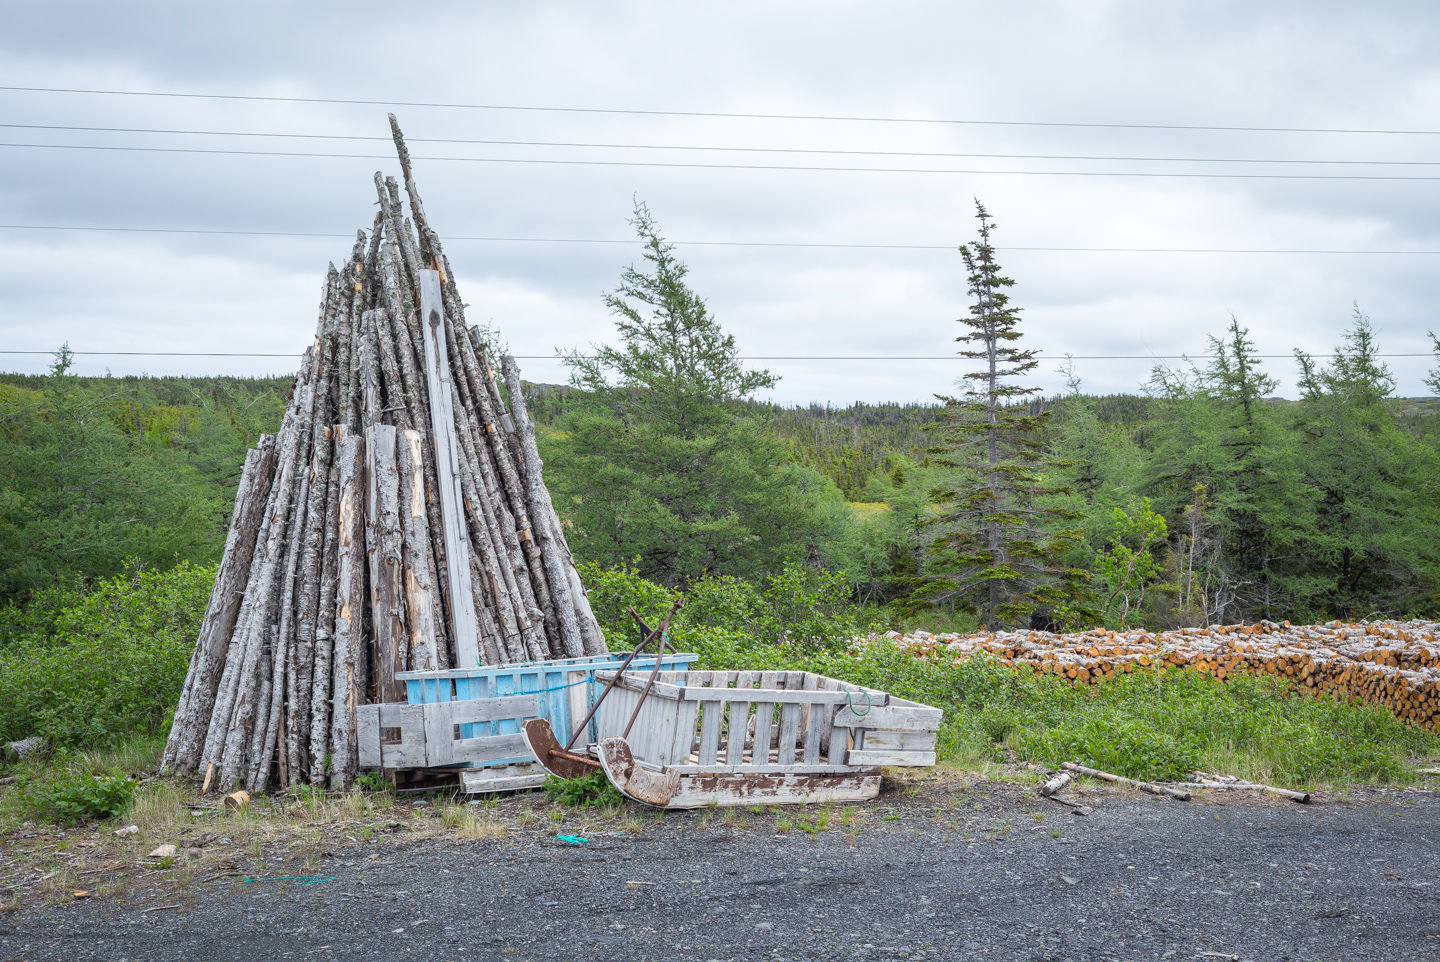 Timber and sleds at the firewood depot. Saint Lunaire-Griquet, Newfoundland 2016